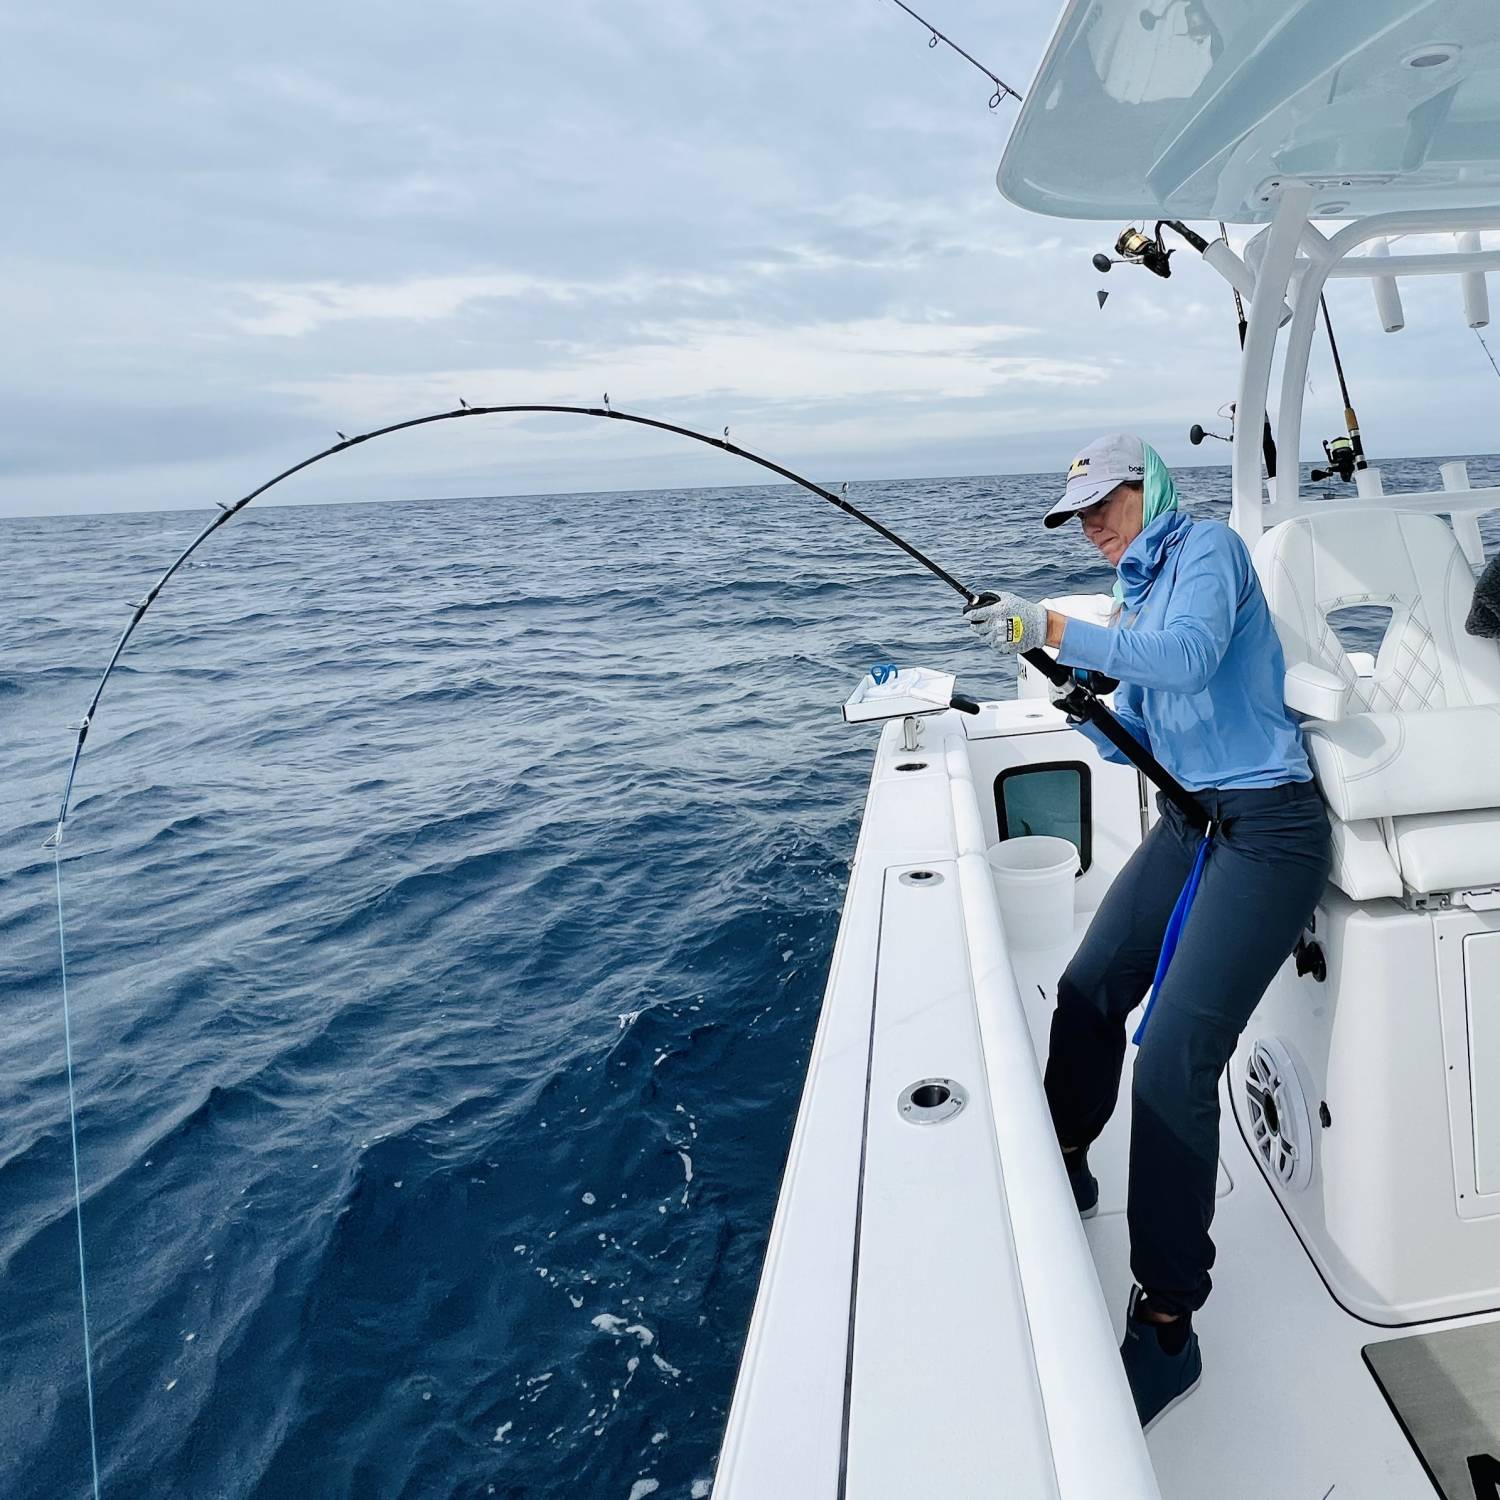 This was taken 65 miles offshore. This fishing spot was loaded with huge, angry amberjack. We h...